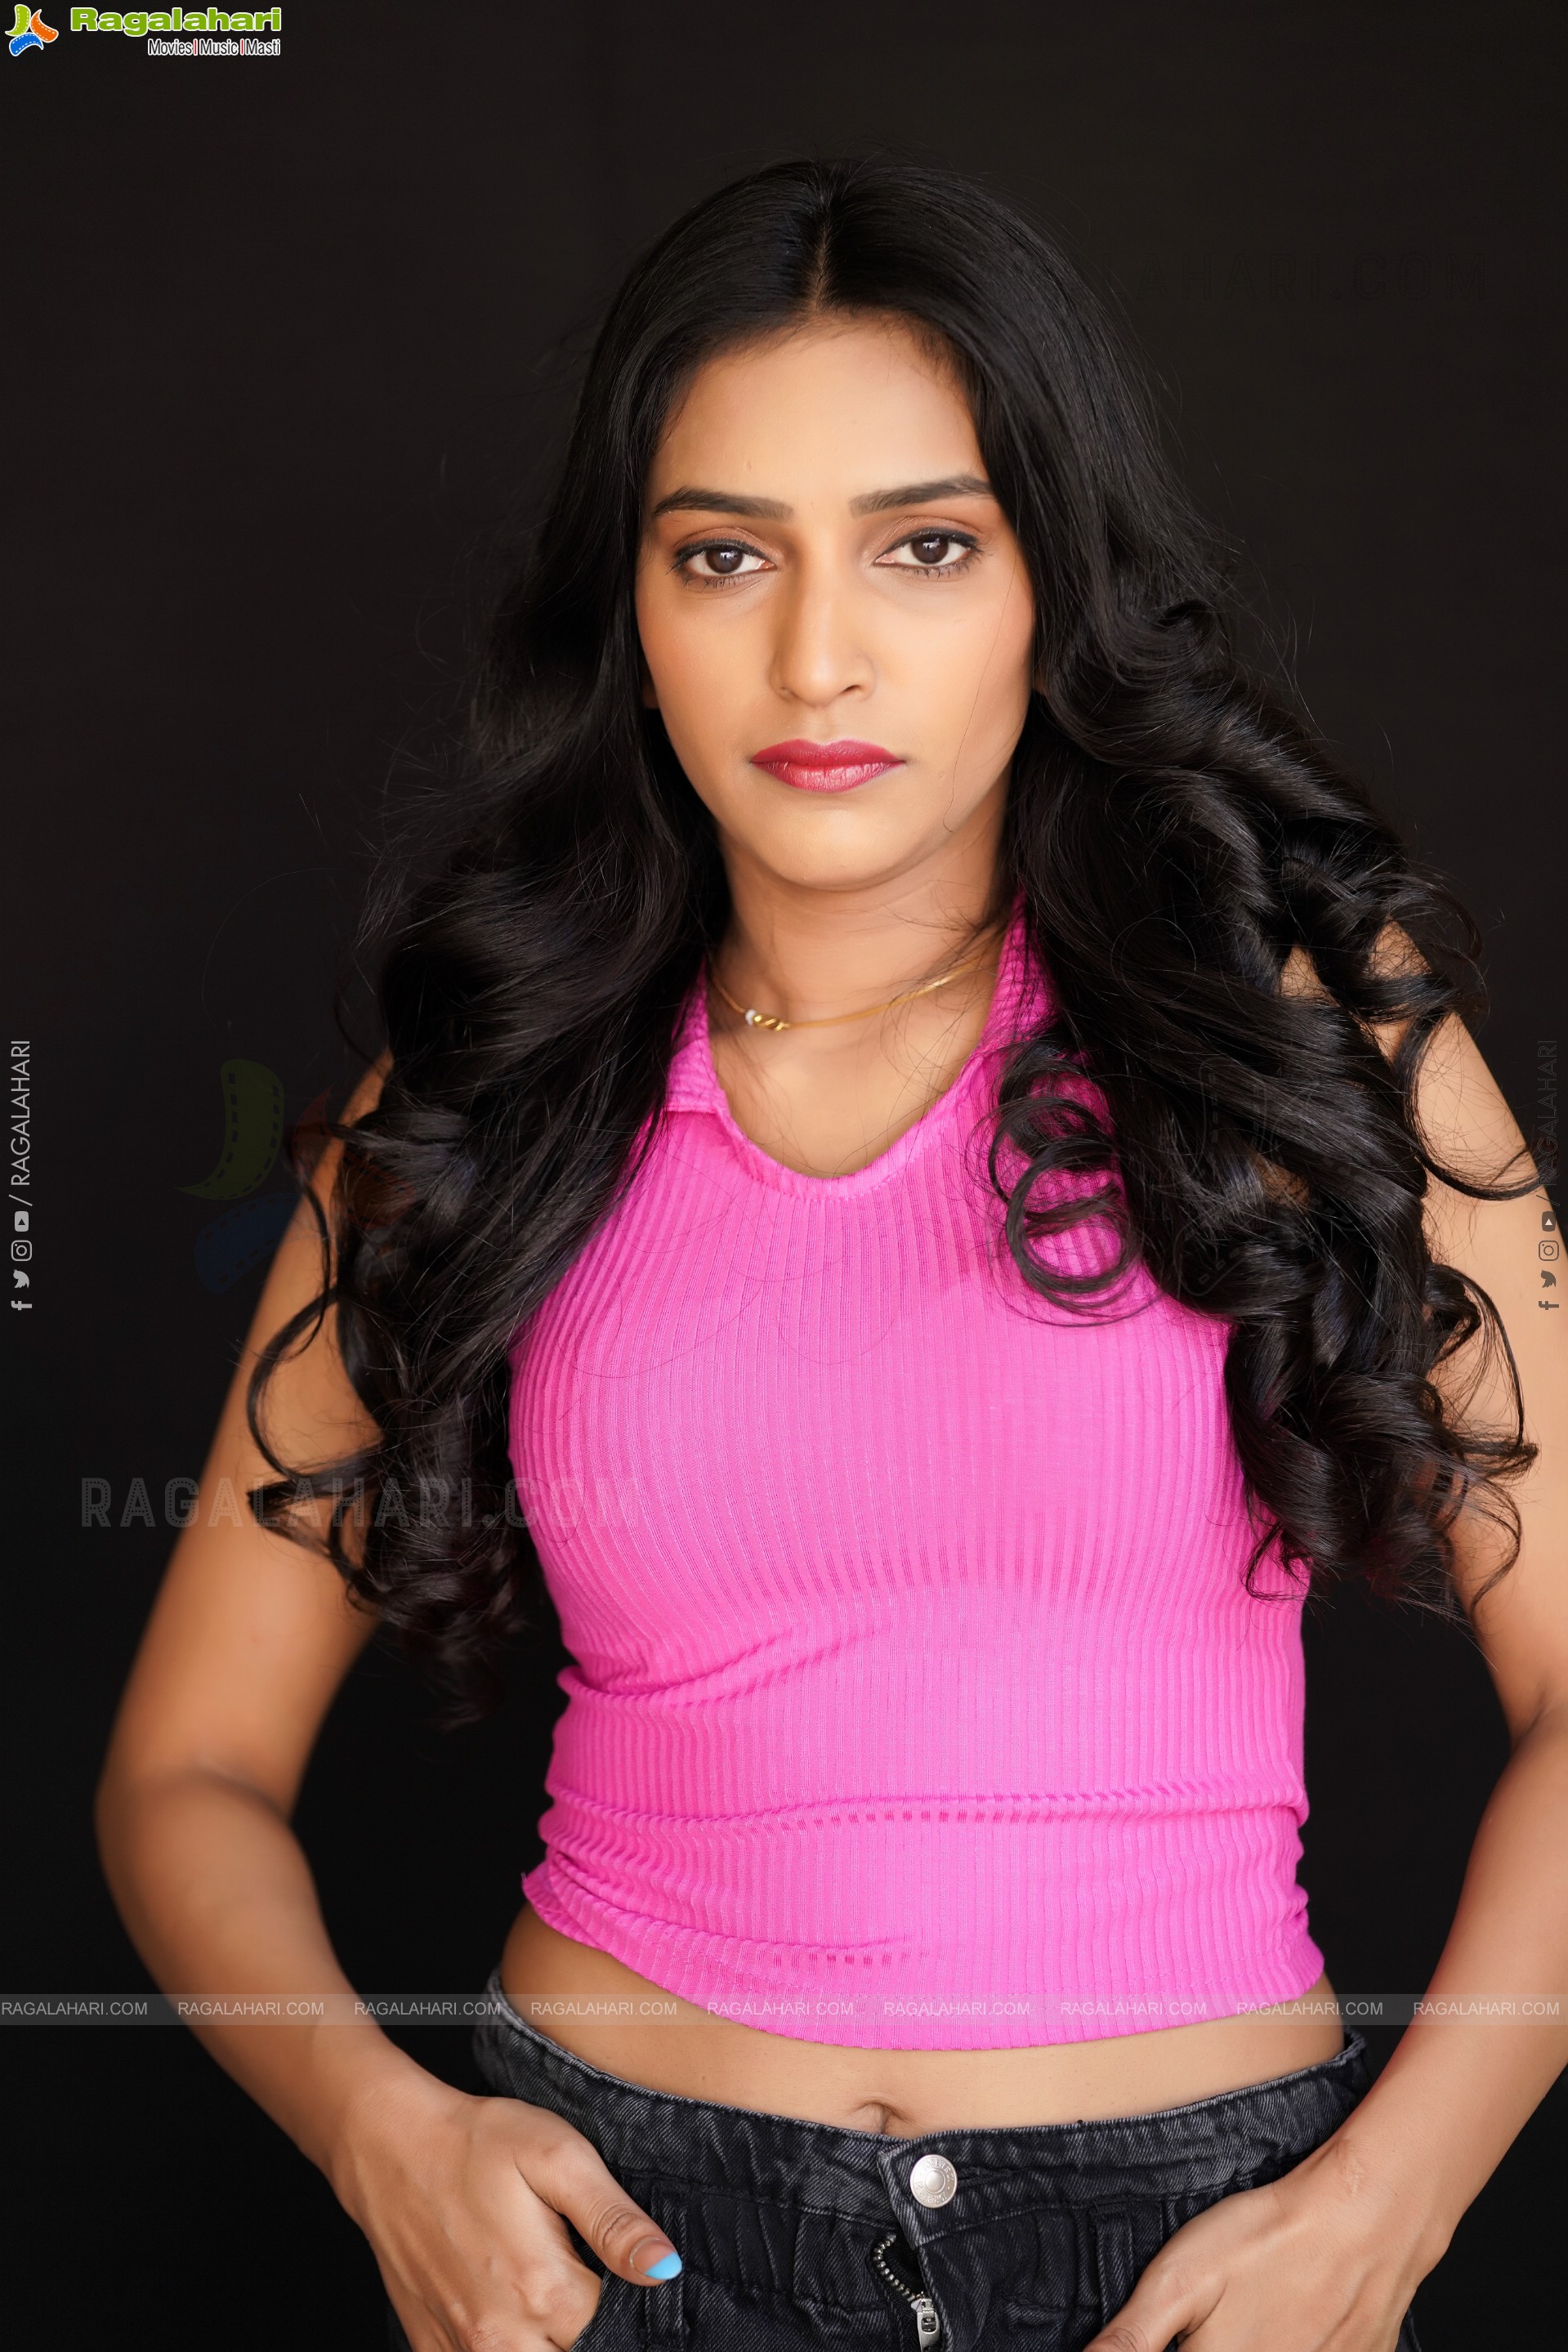 Nikita Gangurde in Pink Knitted Top and Black Shorts, Exclusive Photoshoot